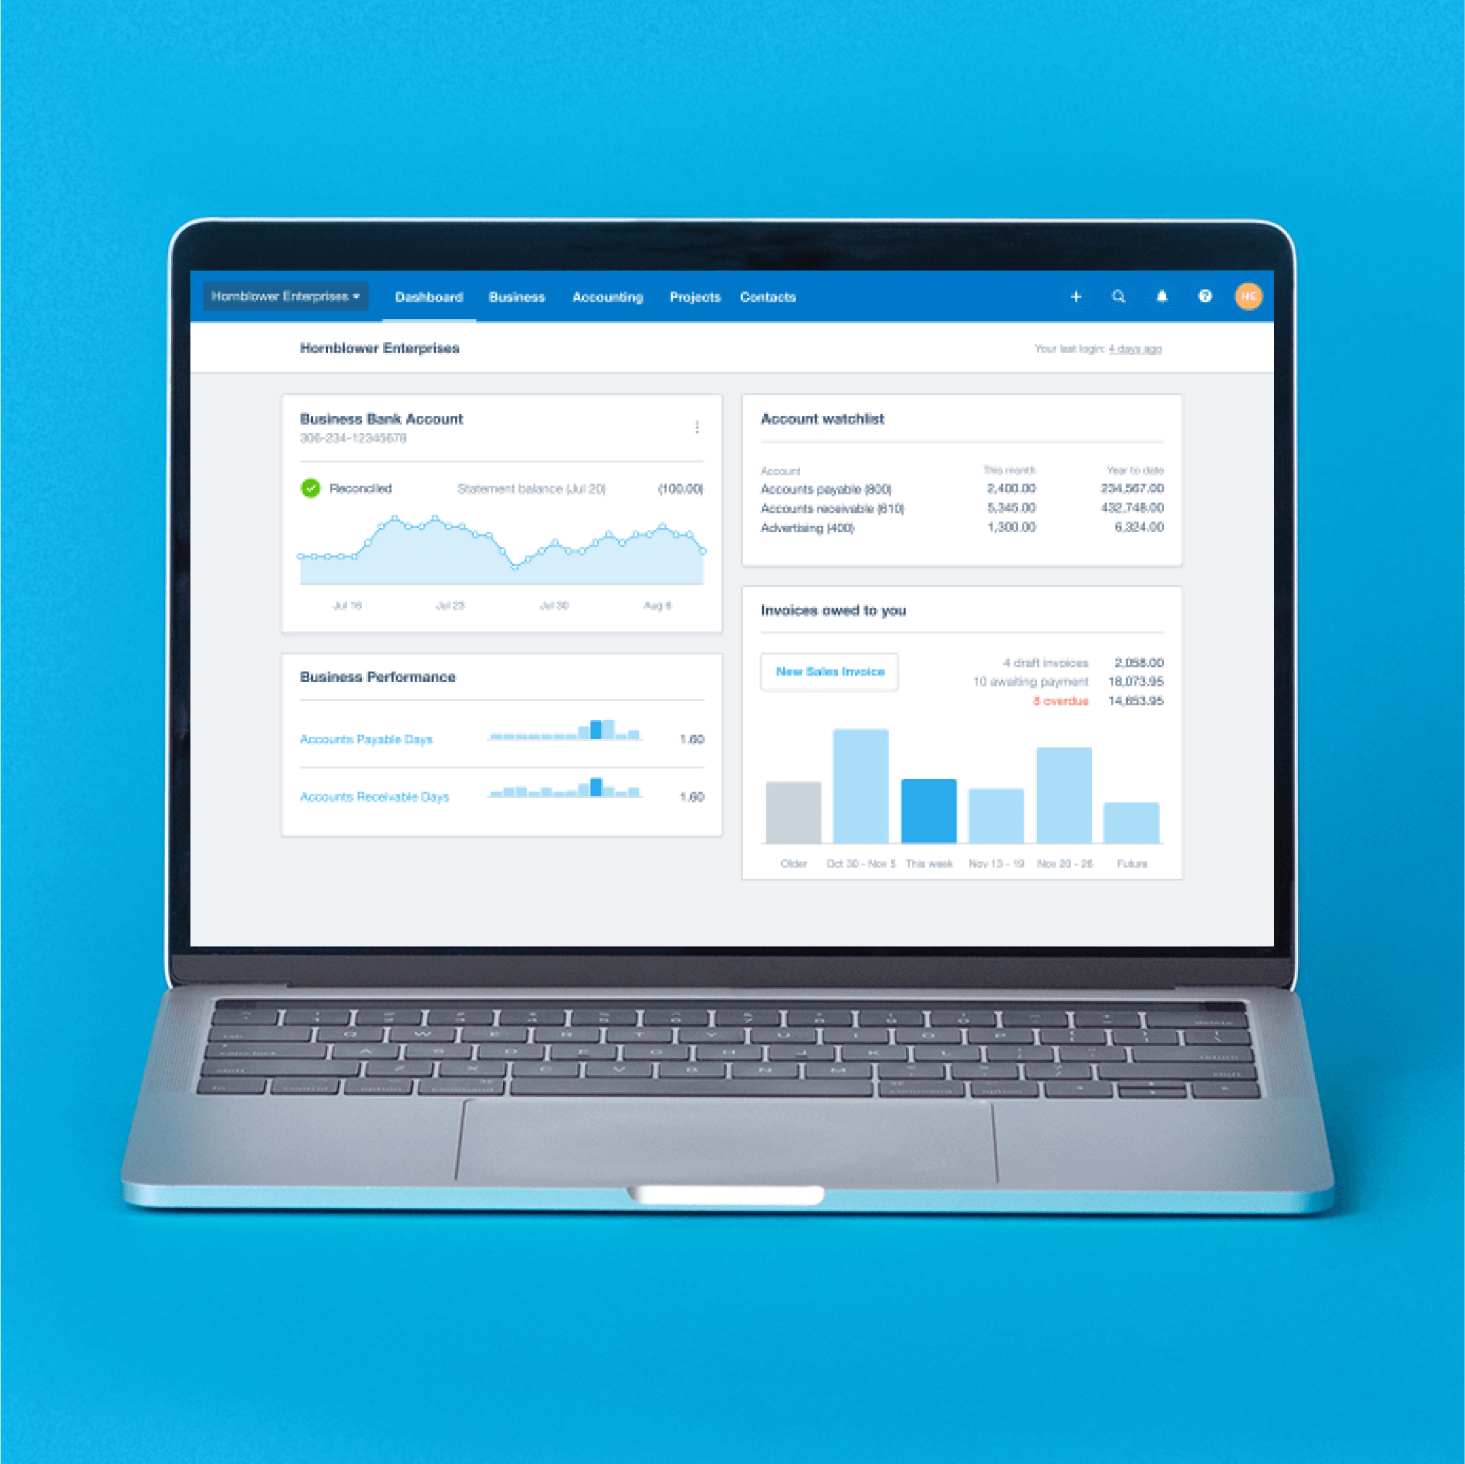 The Xero dashboard shows bank balances, the amount of invoices owed,  and an accounts watchlist.